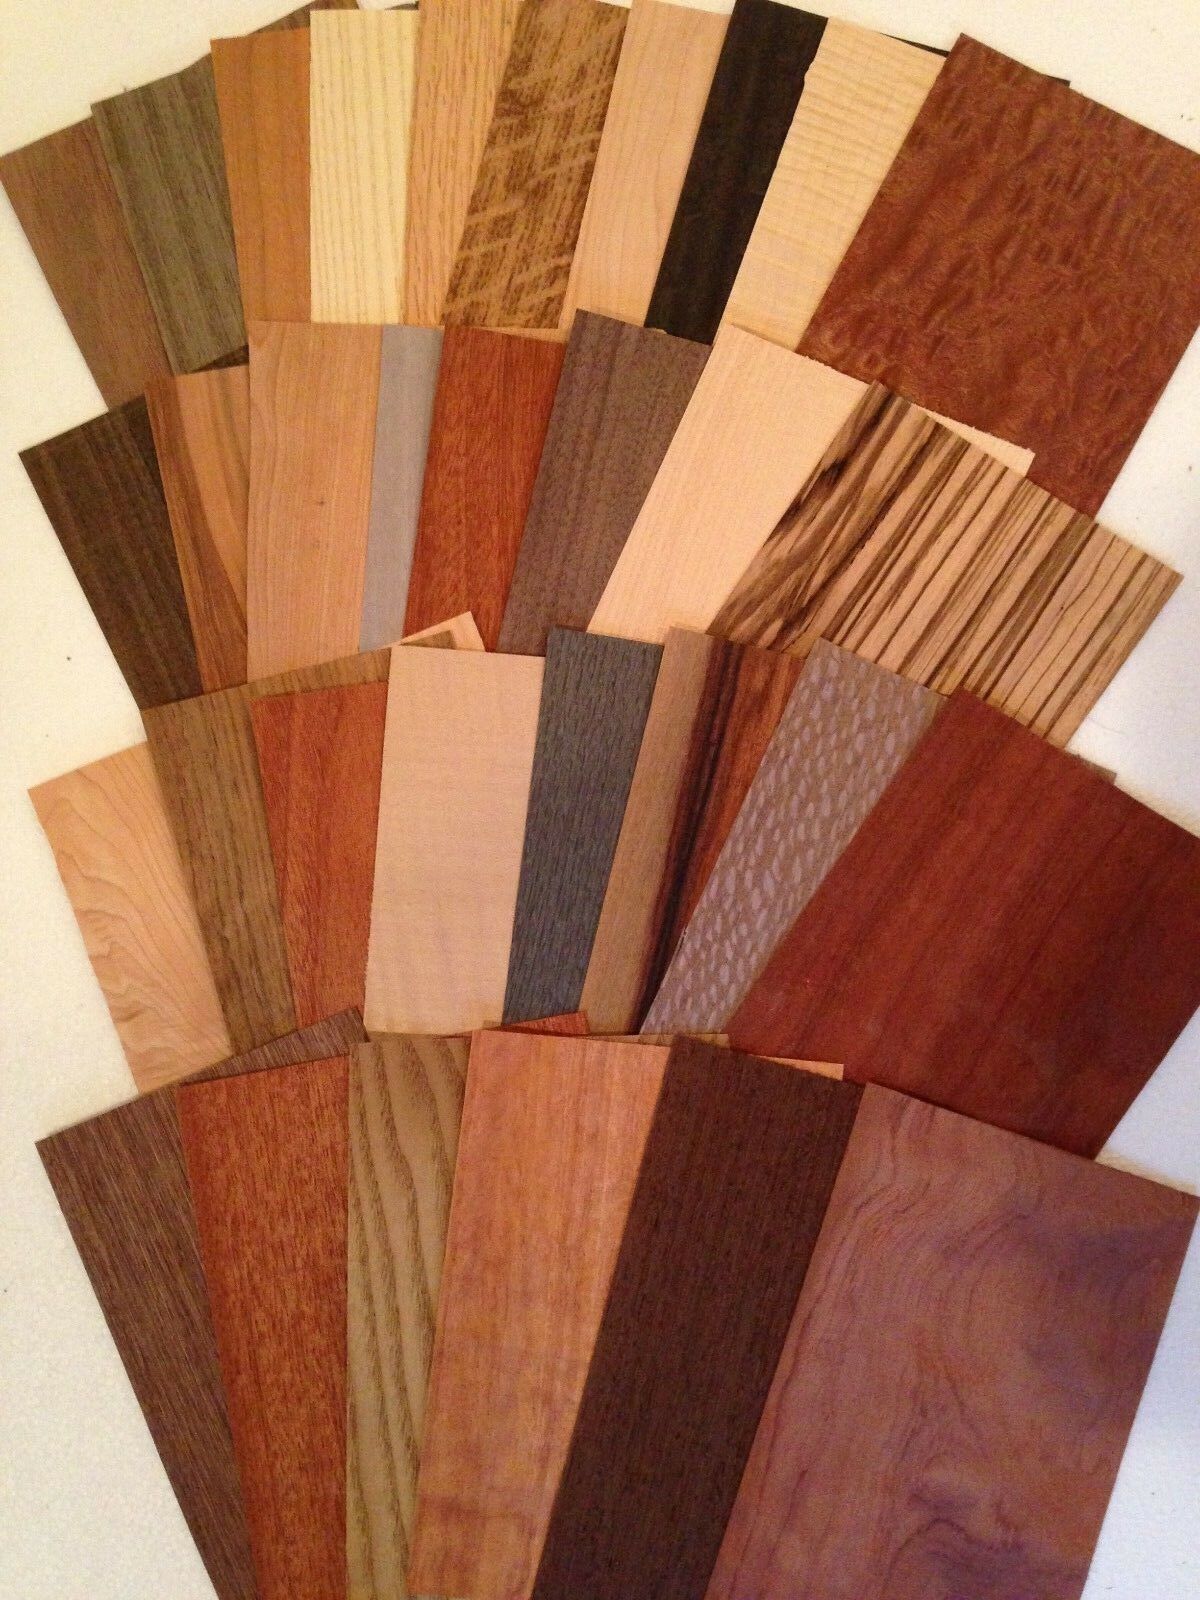 Wood Veneer Variety Piece Pack Over 20 Square Feet Artist Craft Cricut Marquetry